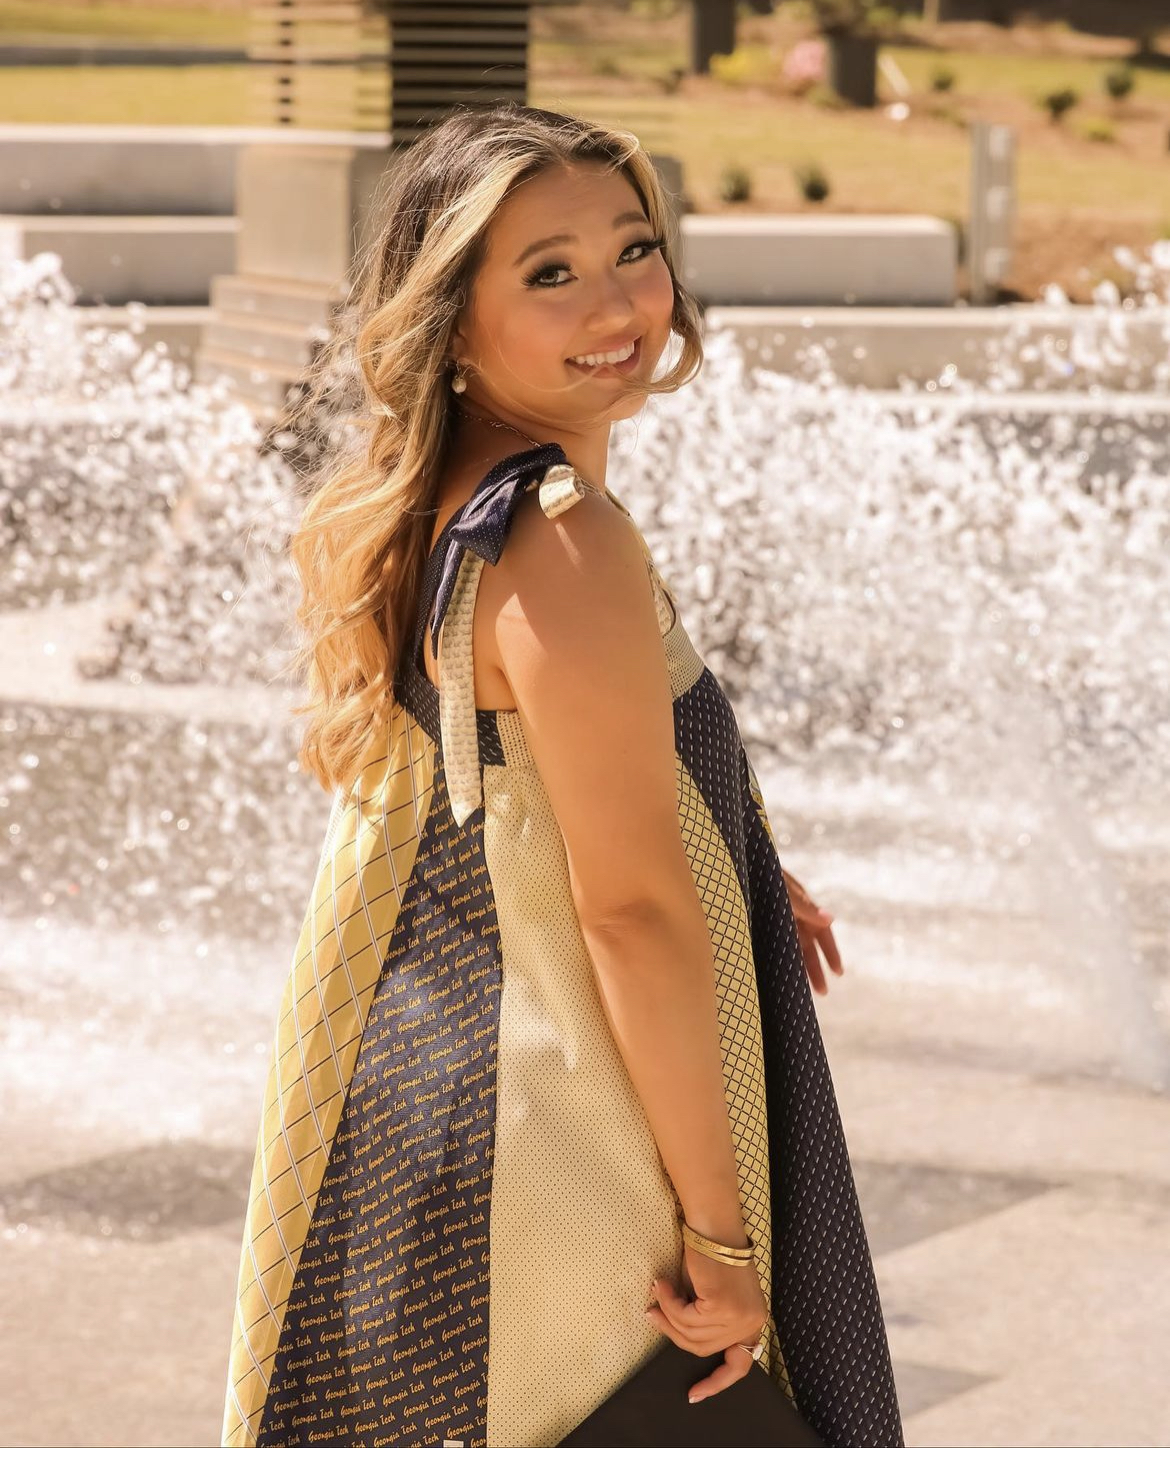 Kelsey Watkins made a dress completely of vintage Georgia Tech ties and plans to wear it for commencement.